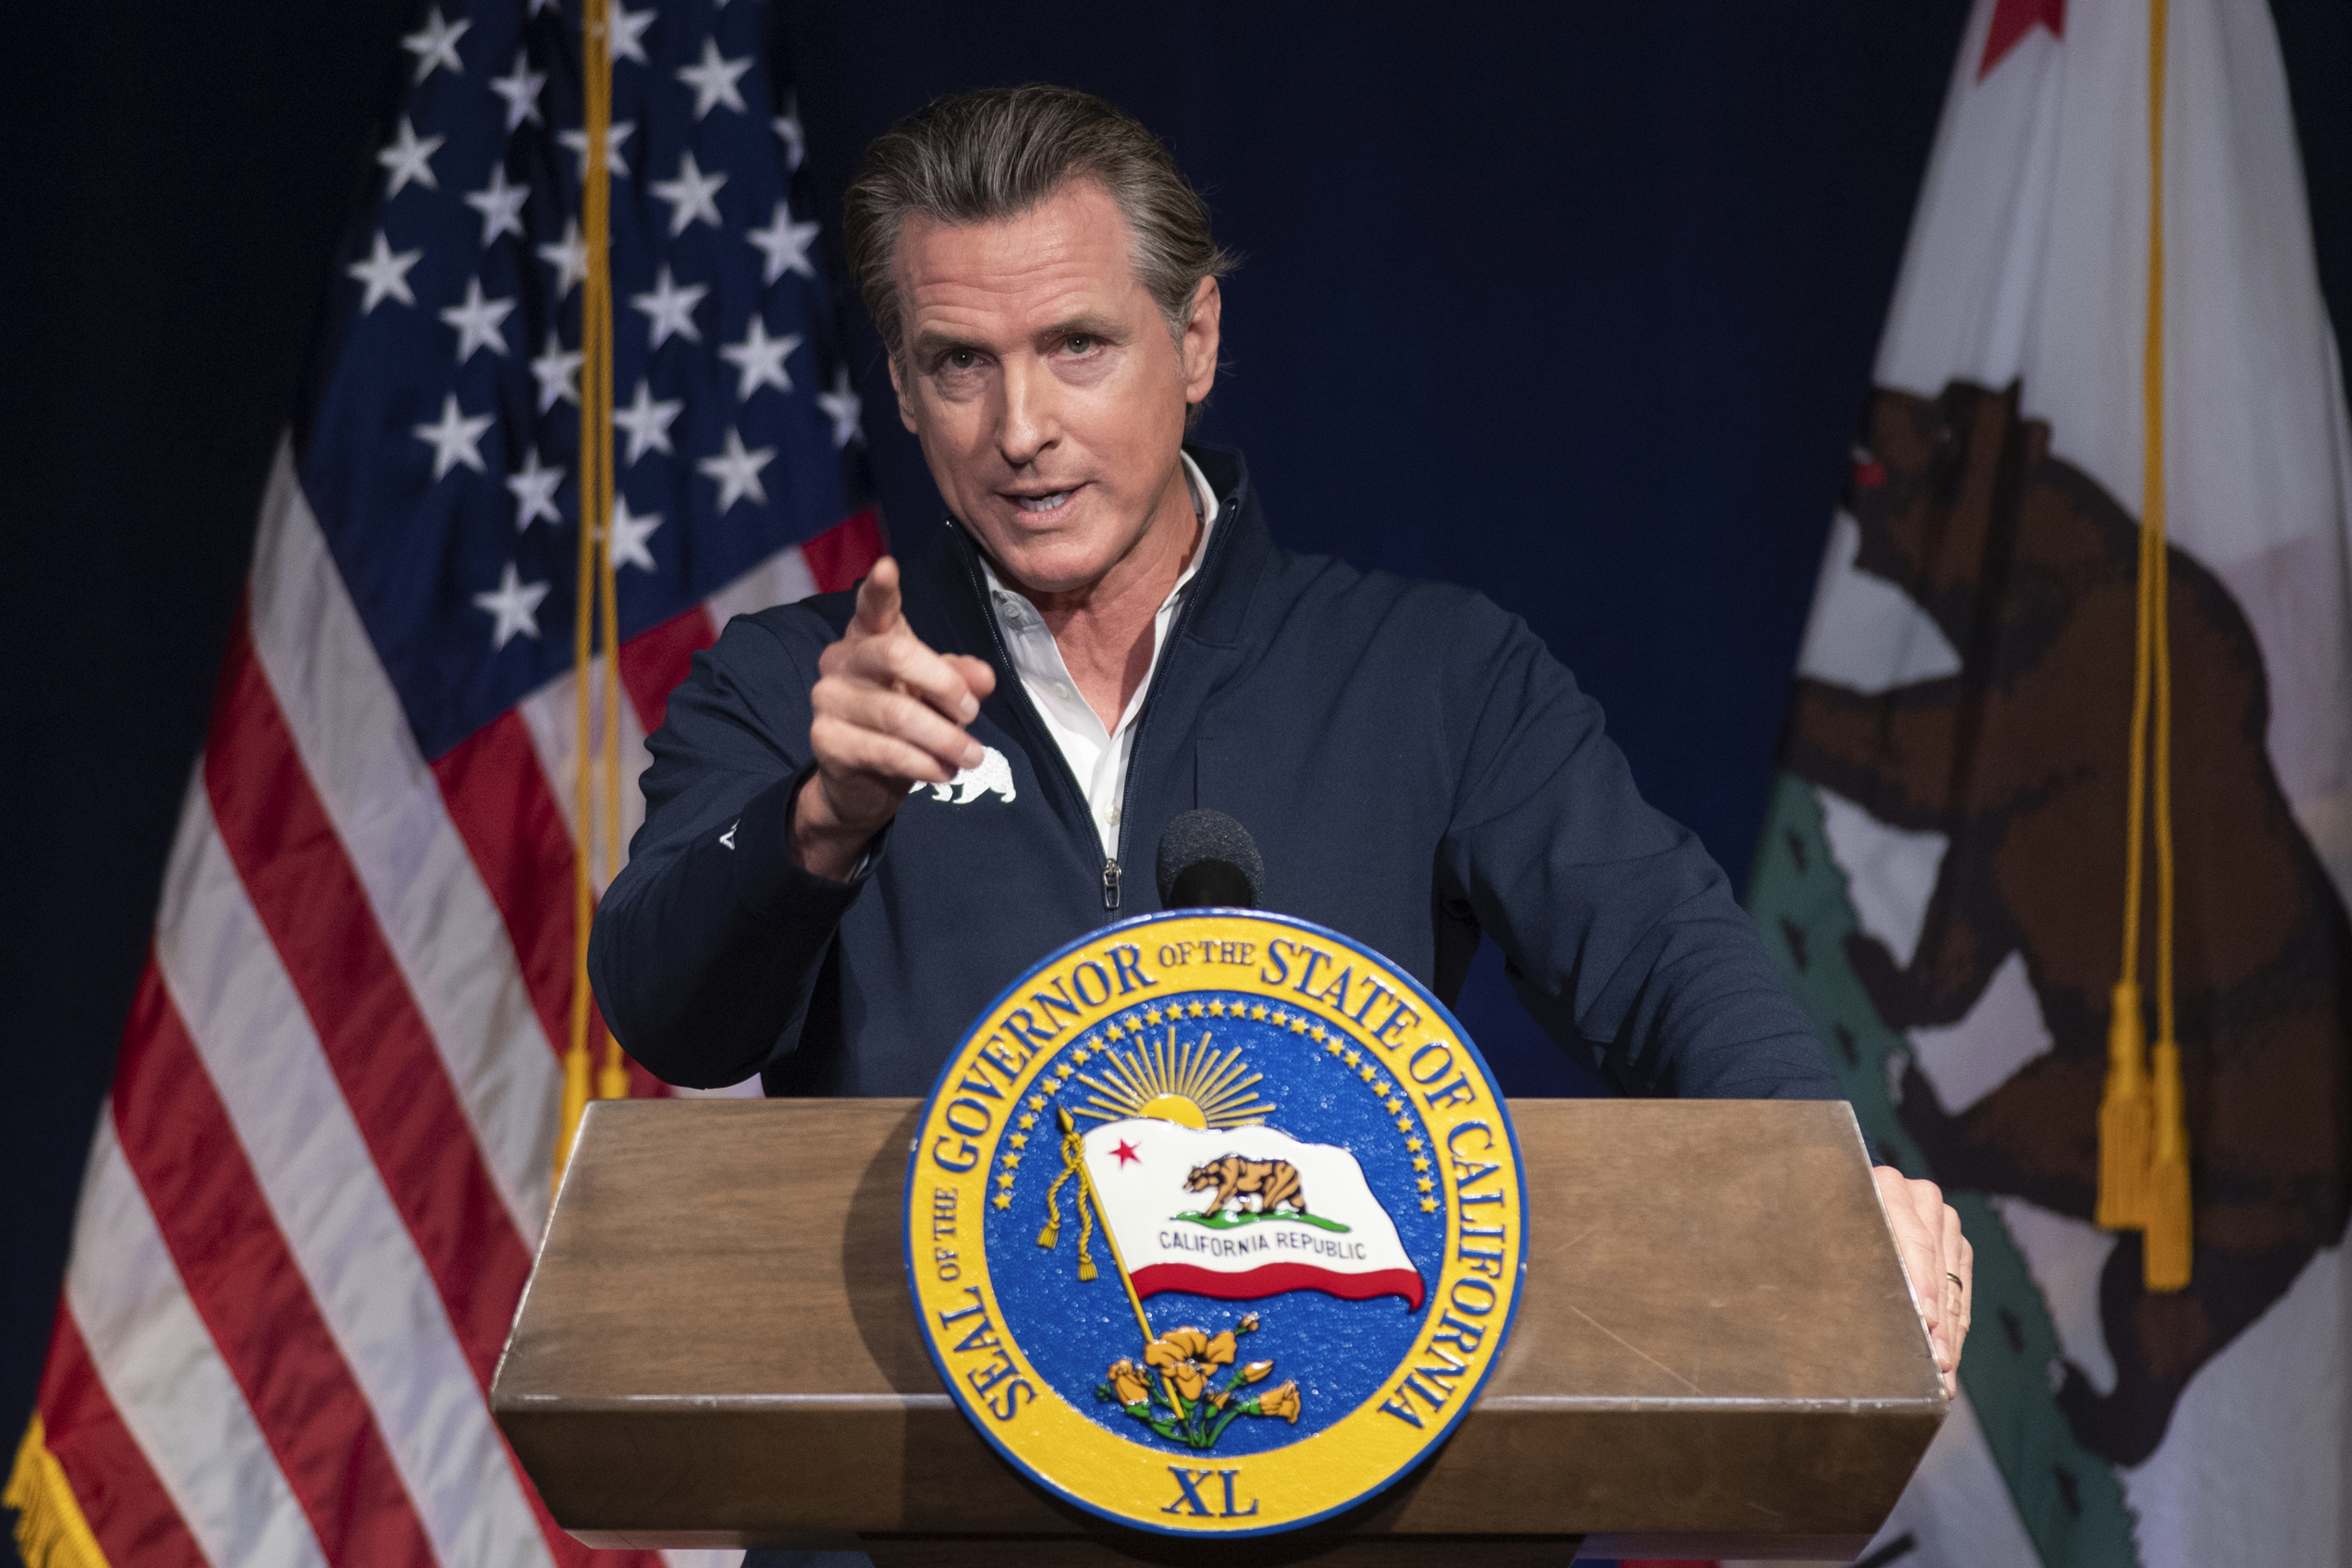 Gov. Newsom’s Climate Budget Would Slash Funds That Protect Coast